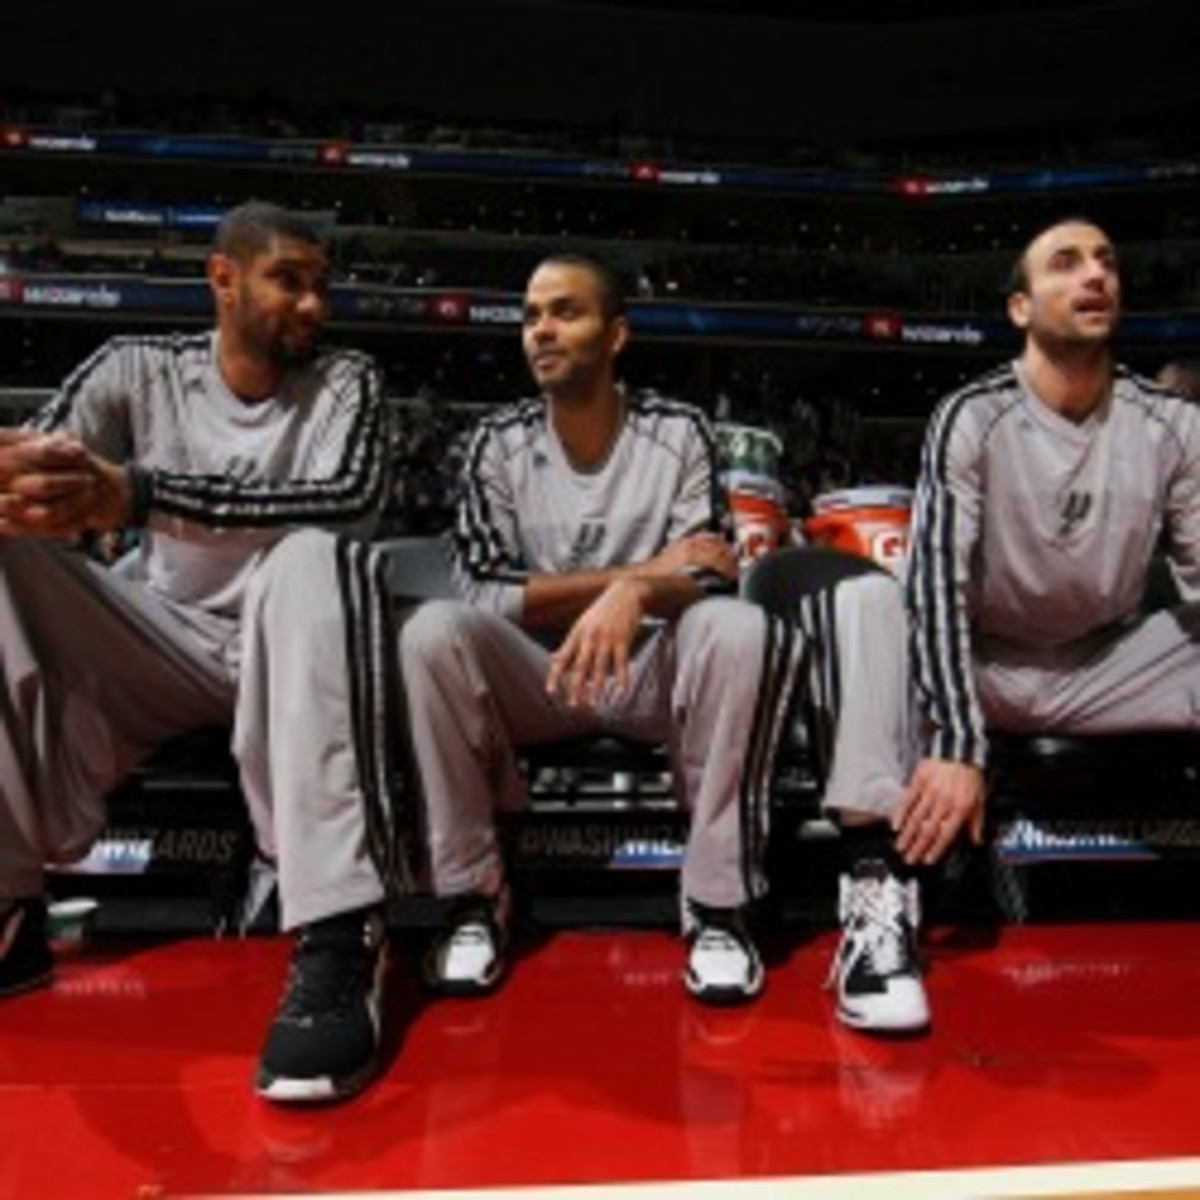 Spurs stars Tim Duncan, Tony Parker and Manu Ginobili sat out the team's Nov. 29 game against the Miami Heat, which one lawyer claims violated the state deceptive and fair trade practices law. (Ned Dishman/Getty Images)